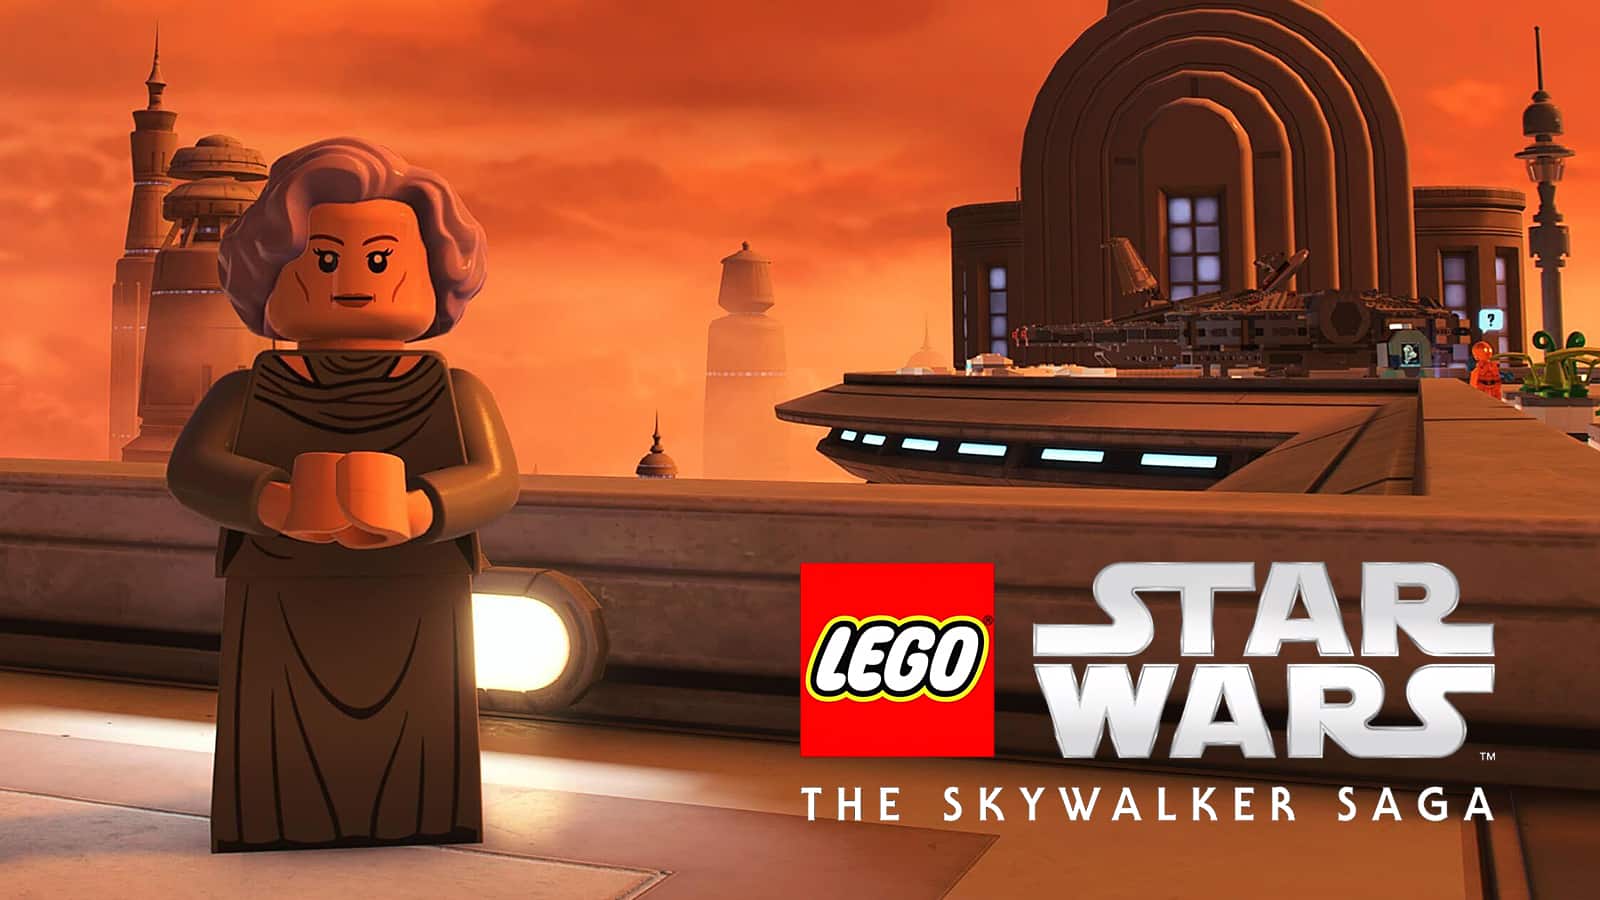 Admiral Holdo, one of the unlockable characters in LEGO Star Wars